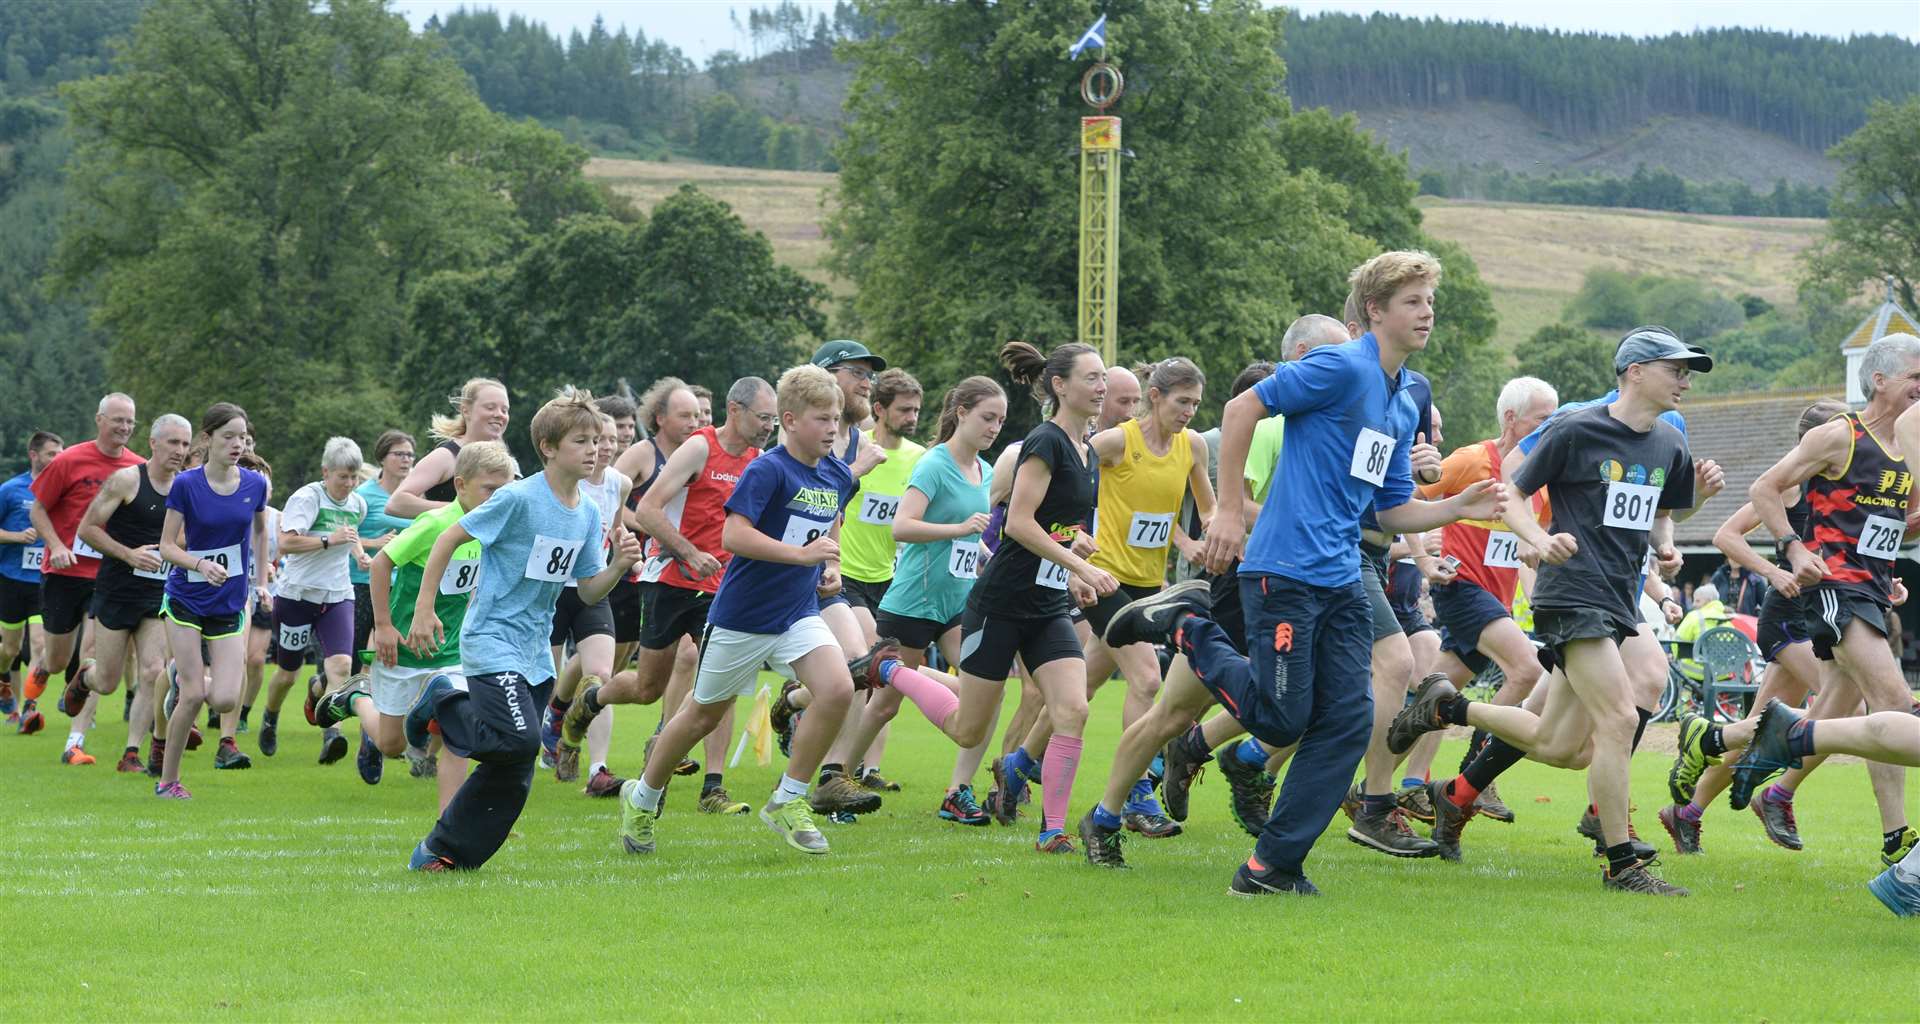 Over 100 runners took part in the hill race at the Strathpeffer Highland Gathering in 2017. Picture: Gair Fraser